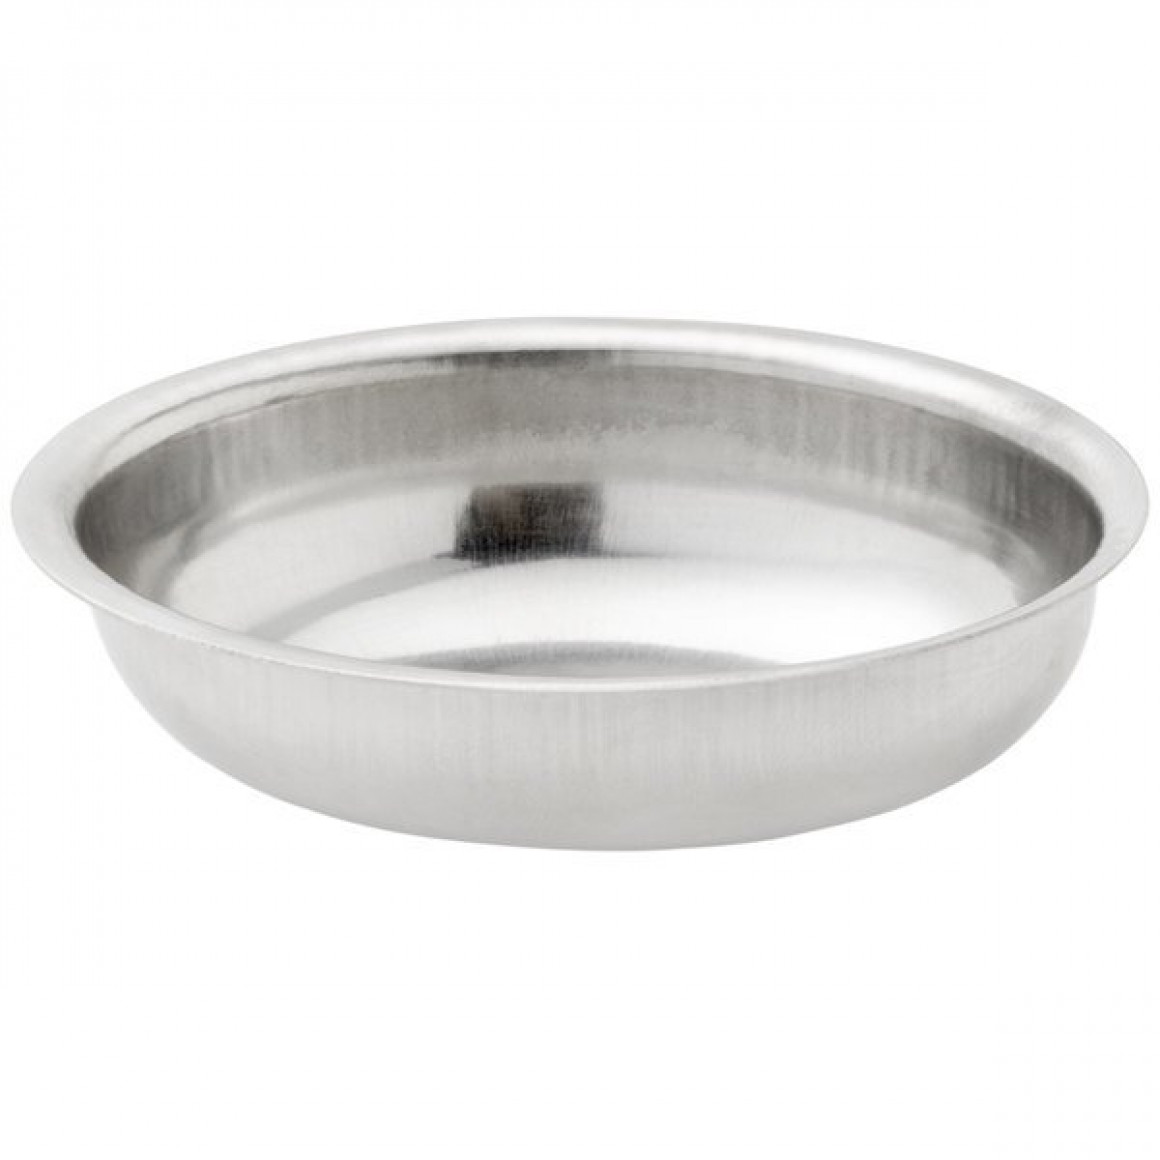 SAUCE CUP, STAINLESS STEEL, OVAL, 1.5 OZ.